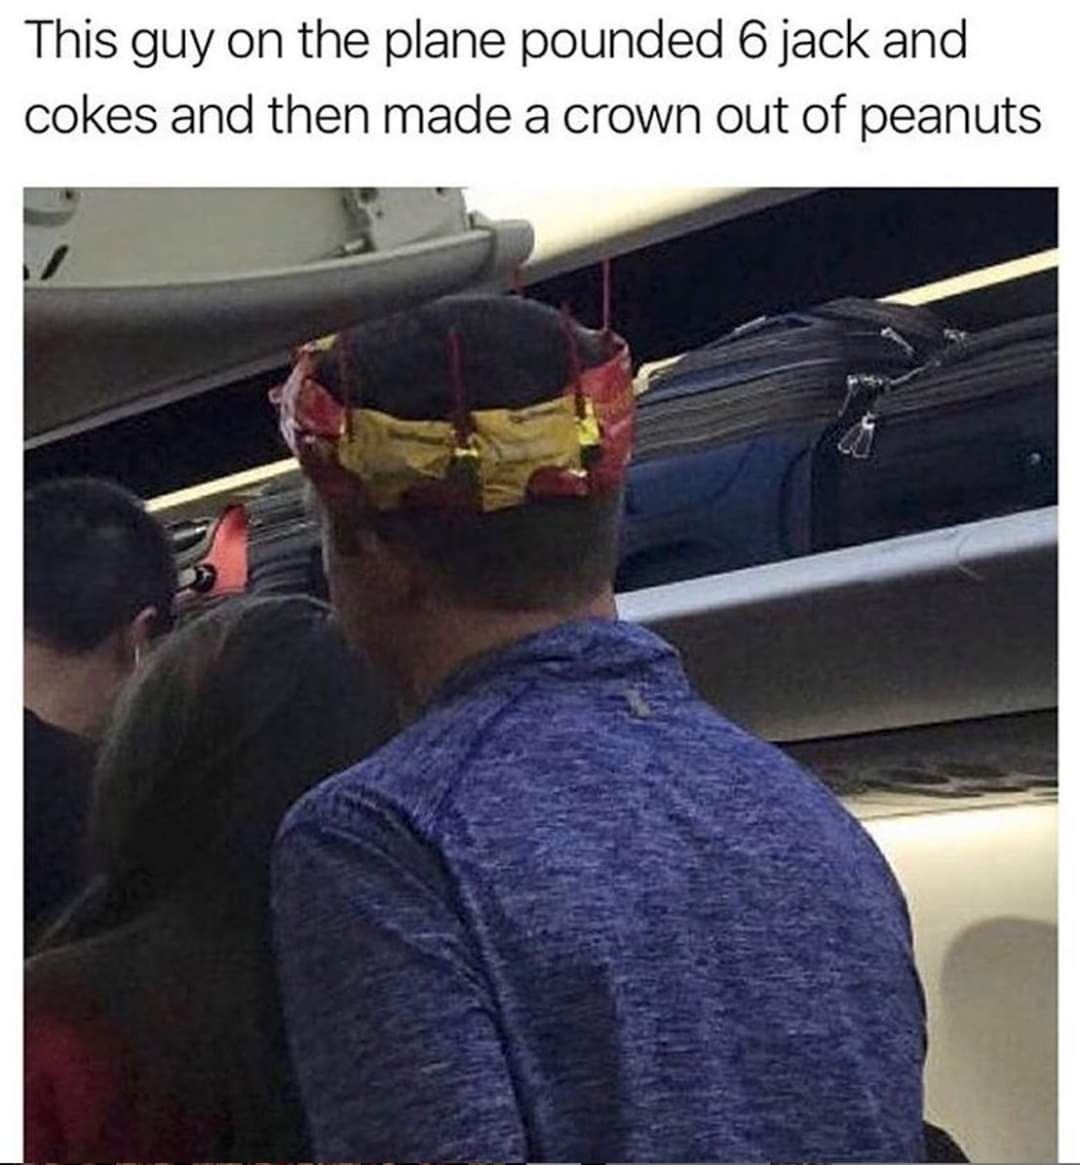 airplane peanut crown - This guy on the plane pounded 6 jack and cokes and then made a crown out of peanuts